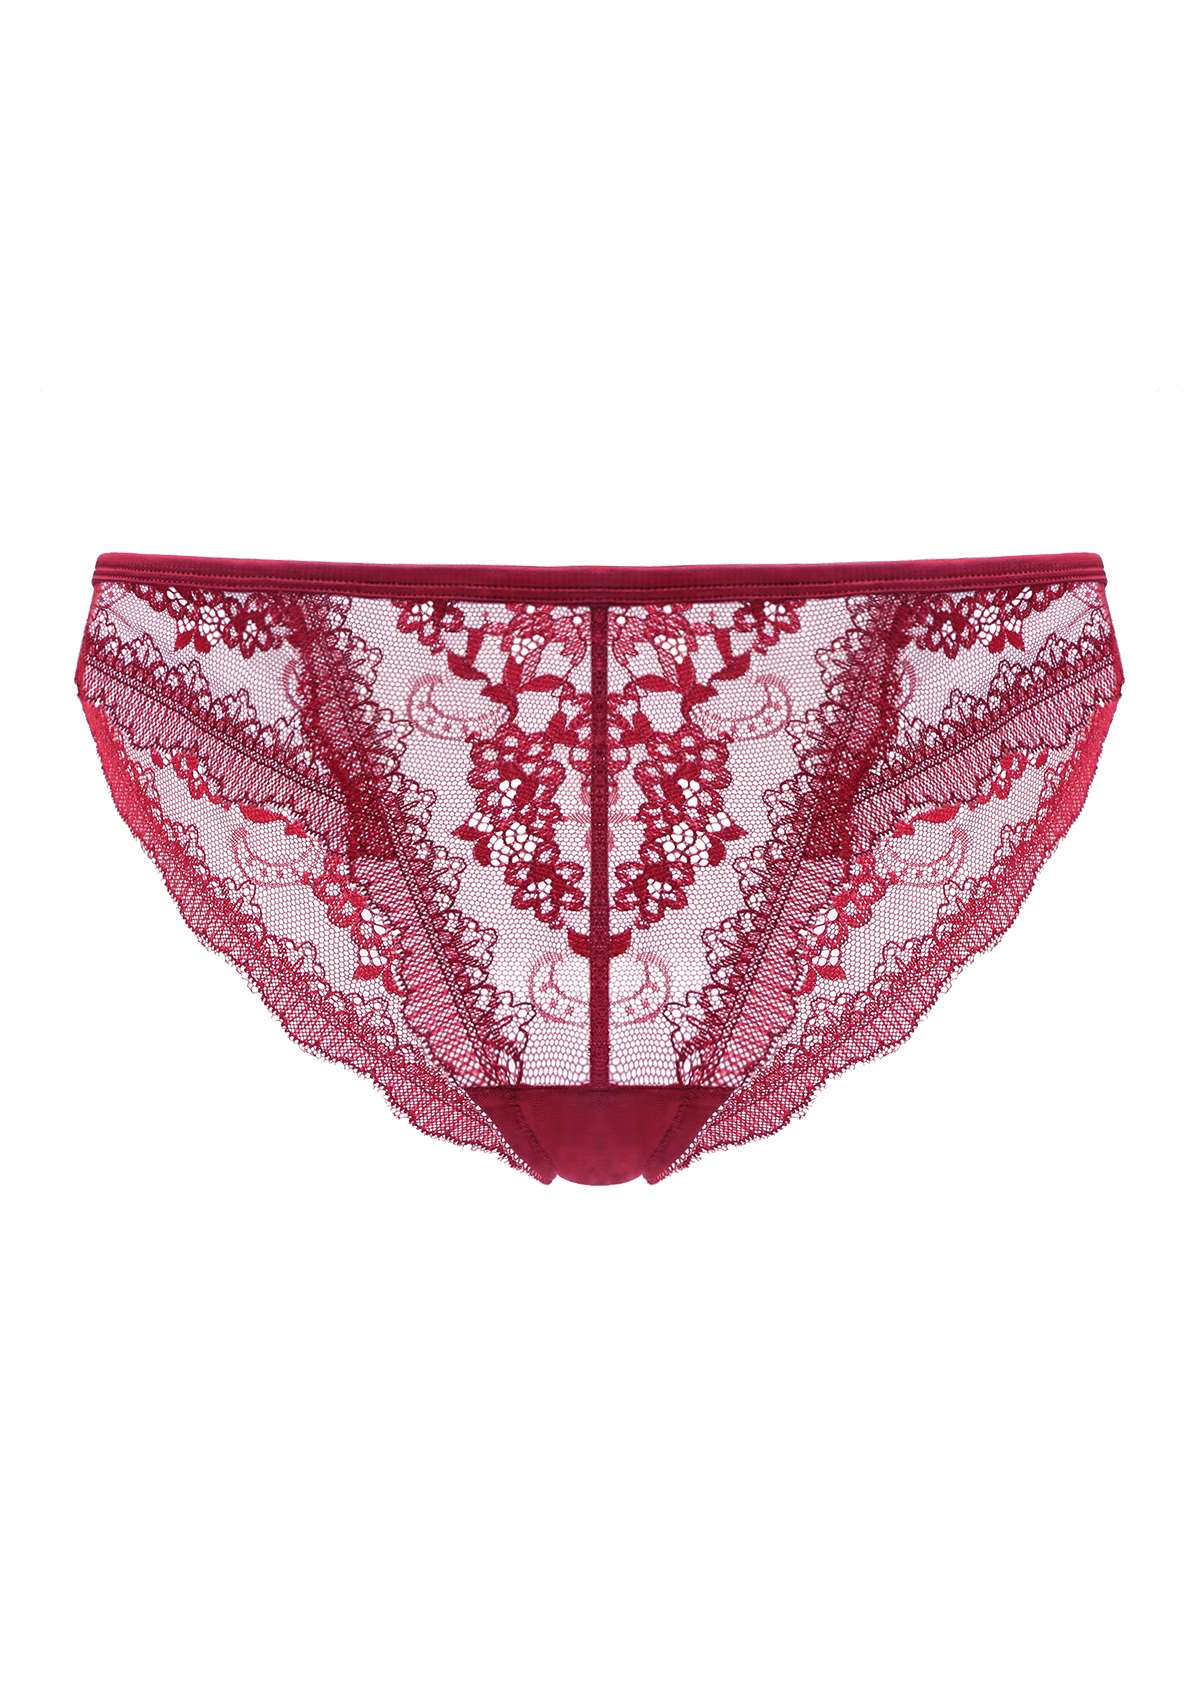 HSIA Floral Bridal Lace Back Sheer Sophisticated Cheeky Underwear  - Burgundy / XXL